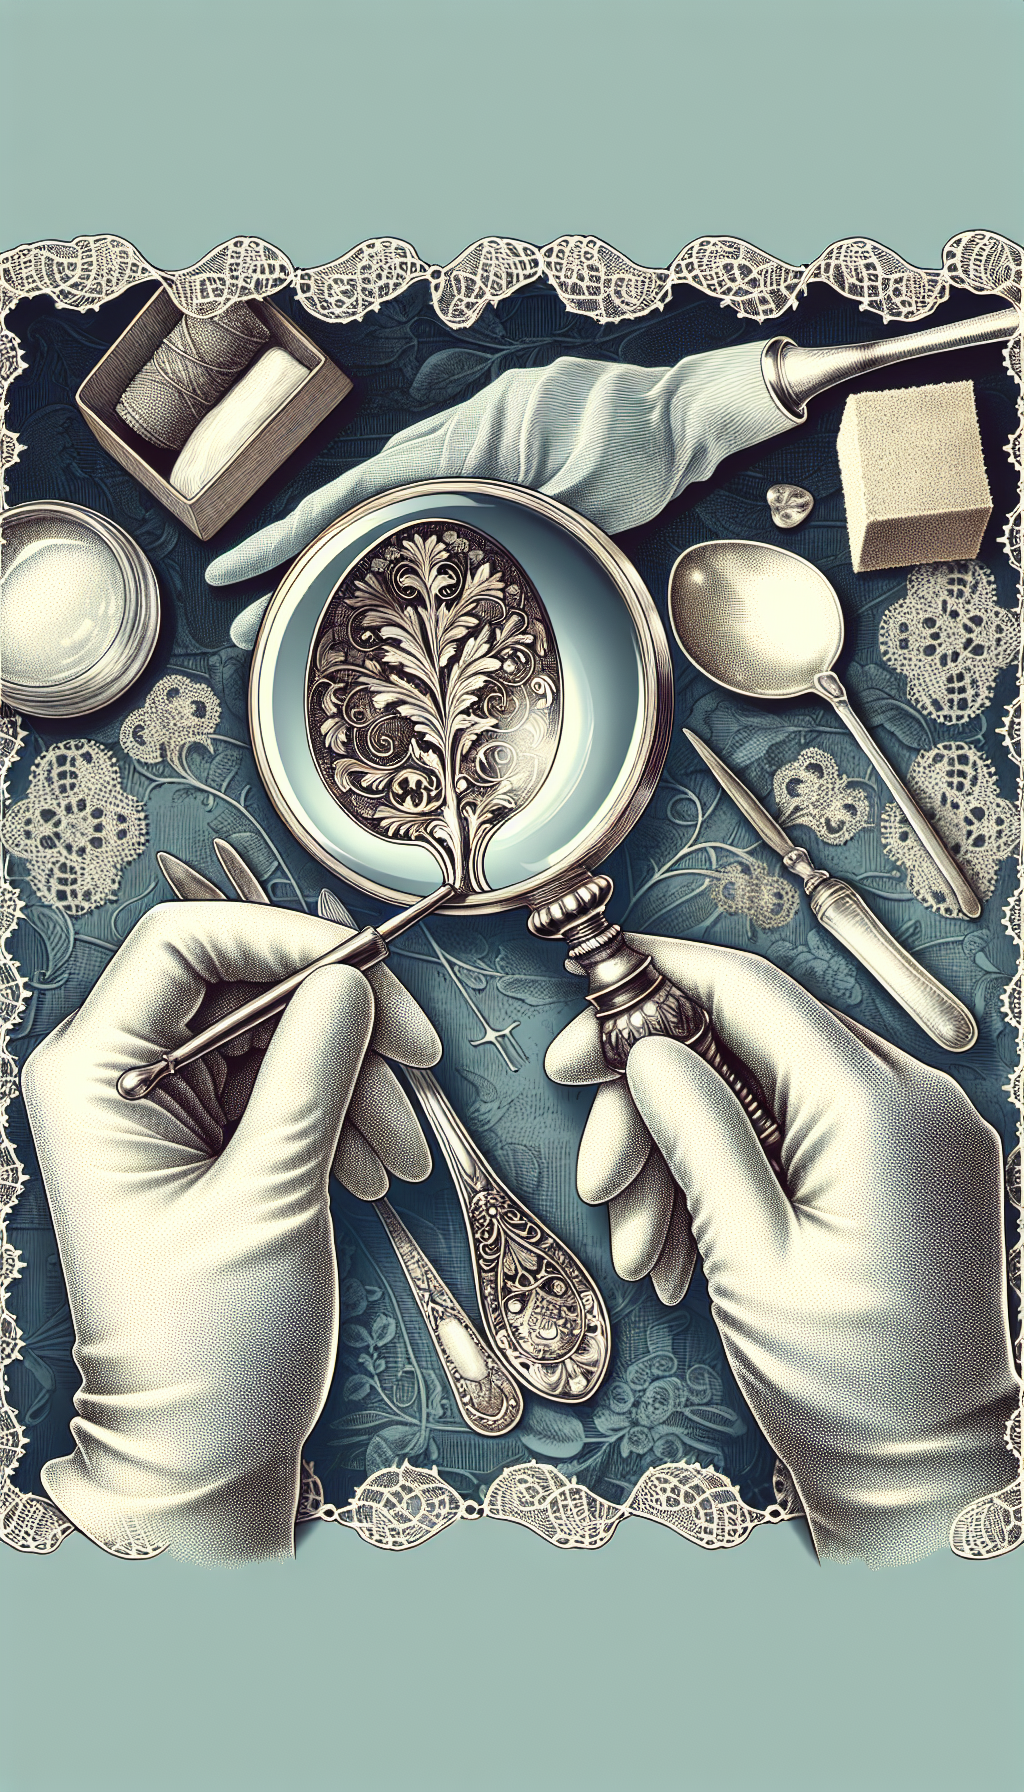 An illustration showcases a hand delicately holding an ornate magnifying glass that reveals intricate hallmarks on a vintage silver spoon's stem, each mark subtly glowing. Surrounding the spoon are faint outlines of protective gloves, a soft cloth, and a wax polish jar, implying preservation care, set against a backdrop of lacy filigree that nods to an antique aesthetic.